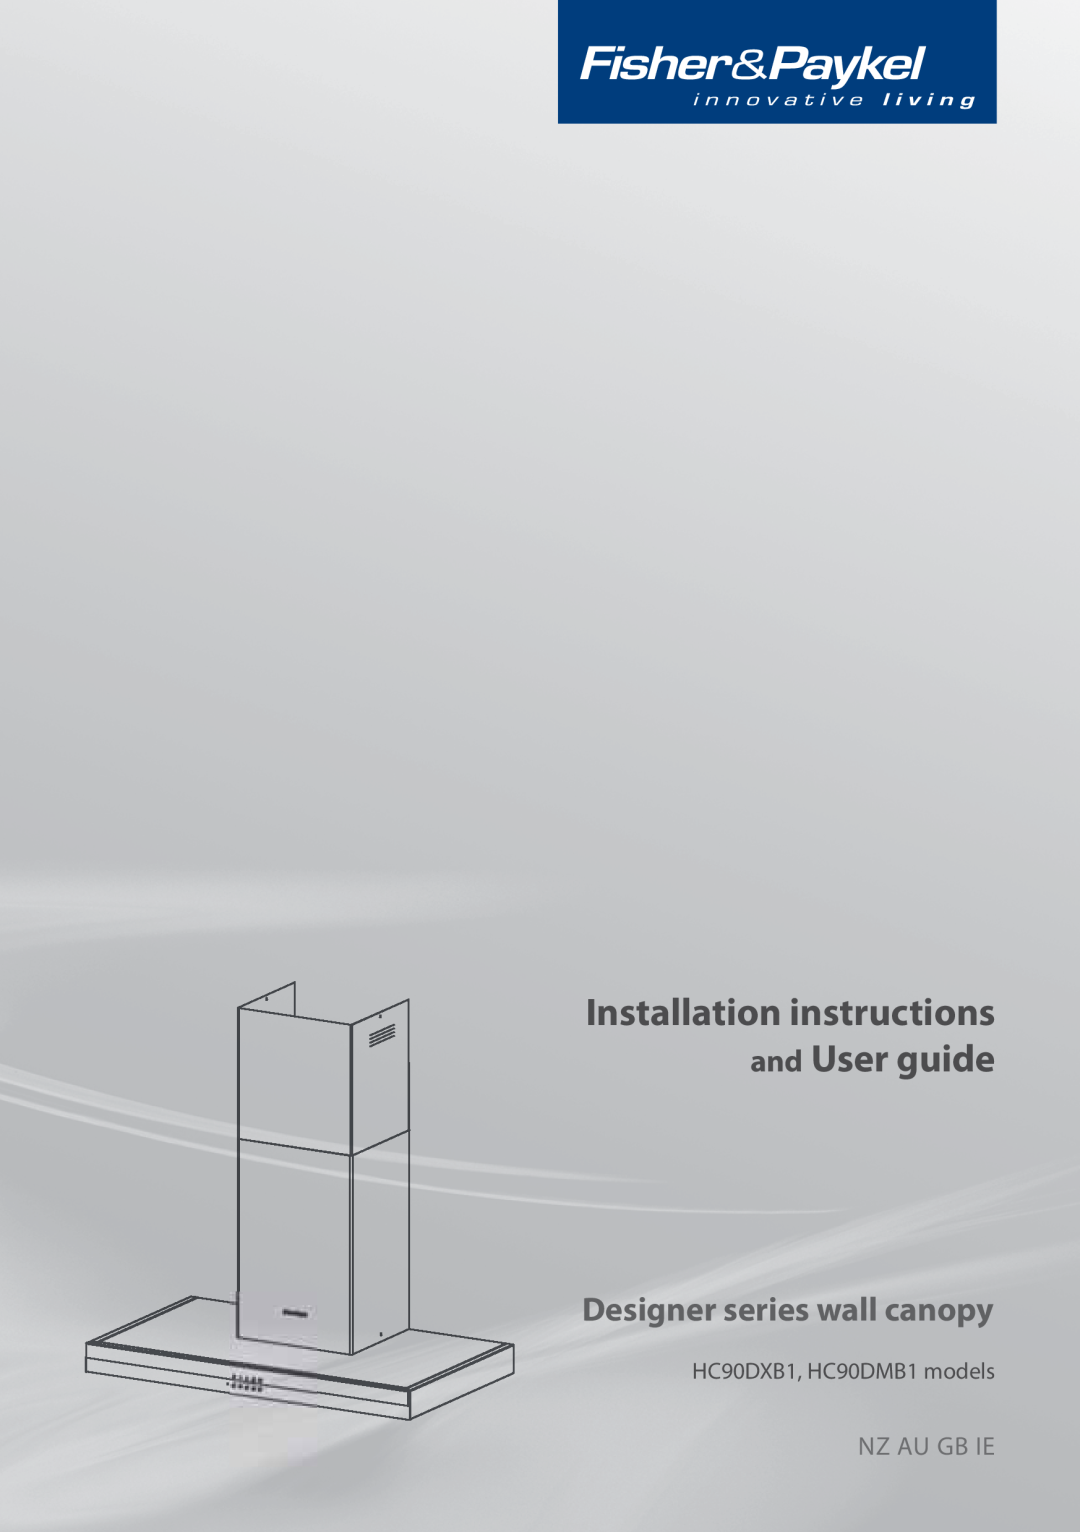 Fisher & Paykel HC90DXB1 installation instructions Installation instructions and User guide, Designer series wall canopy 